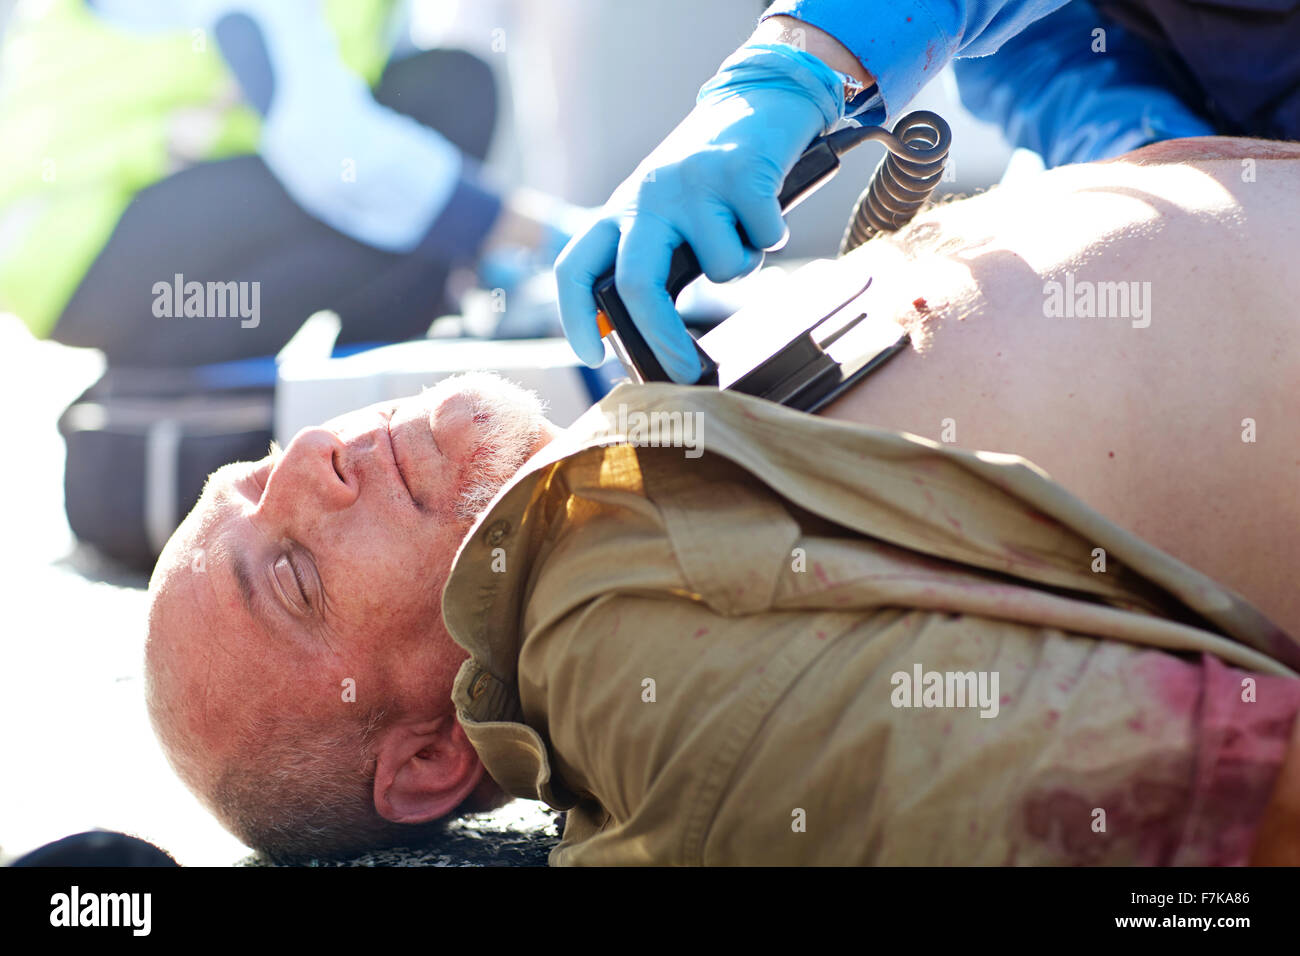 Rescue worker using defibrillator on unconscious car accident victim Stock Photo